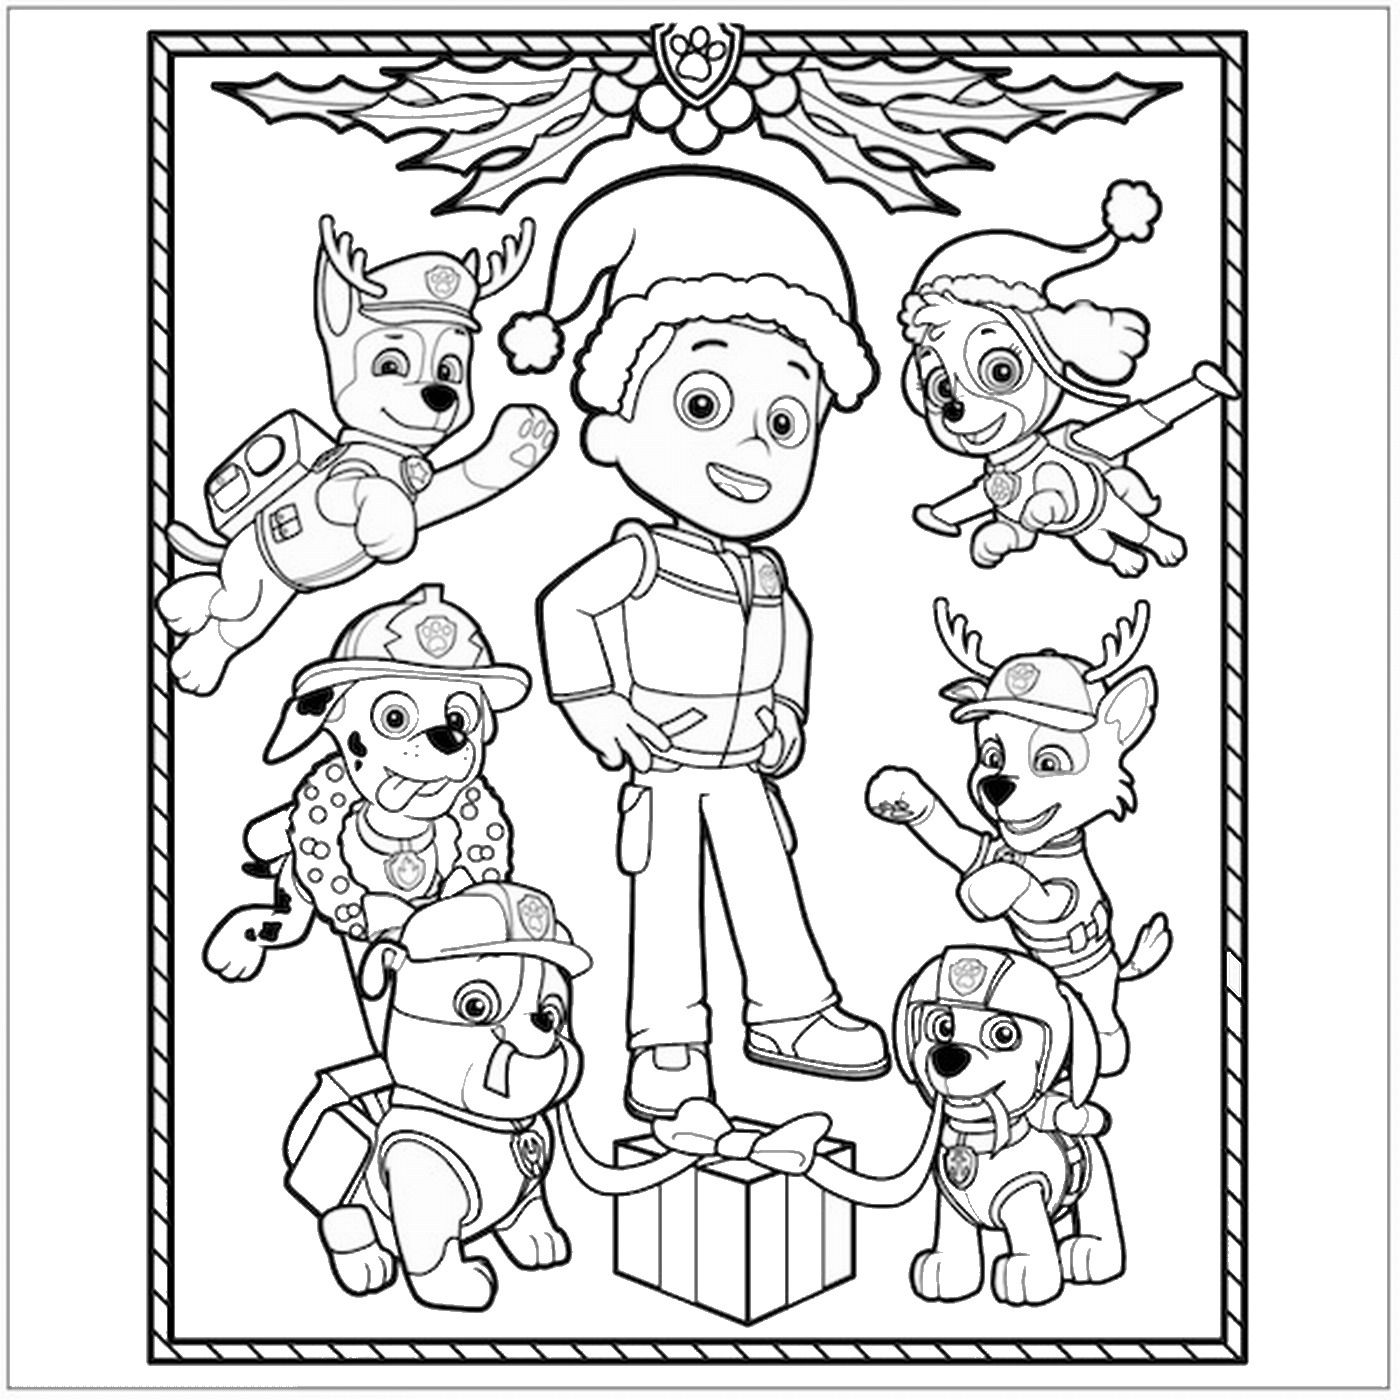 Paw Patrol Coloring Pages | Paw patrol coloring, Paw patrol coloring pages, Paw  patrol christmas